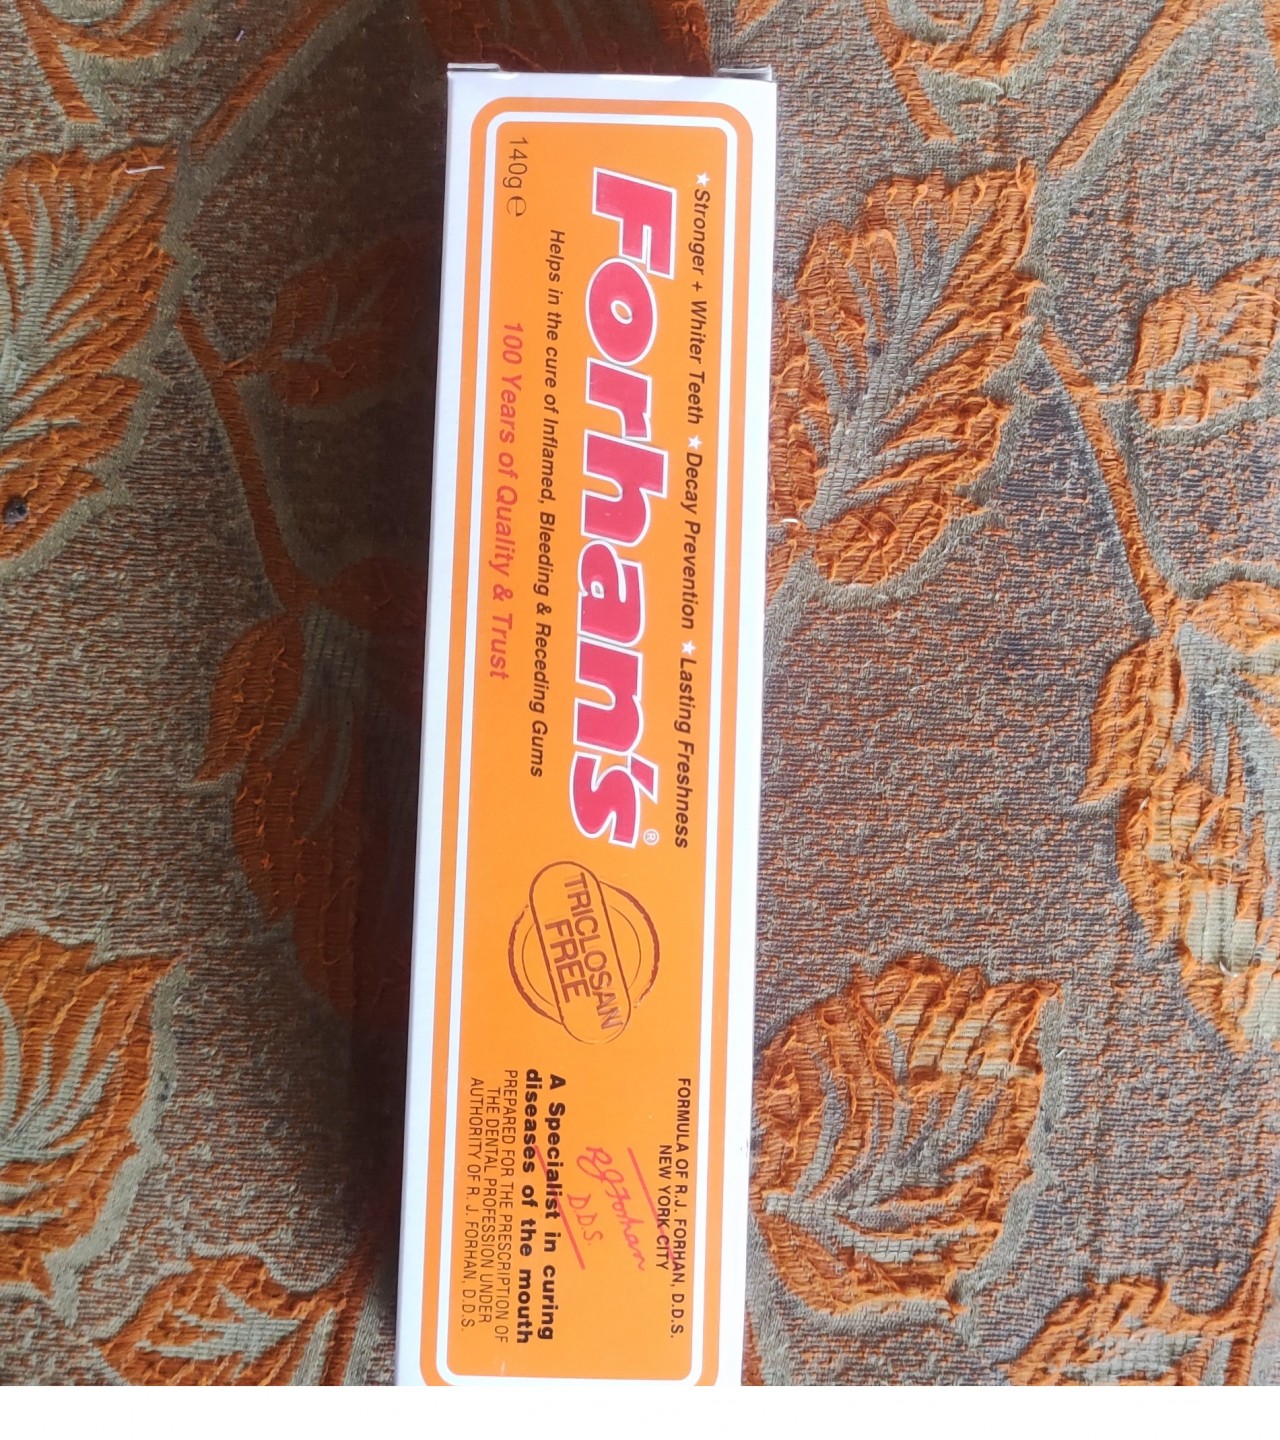 Forhan's toothpaste 65g